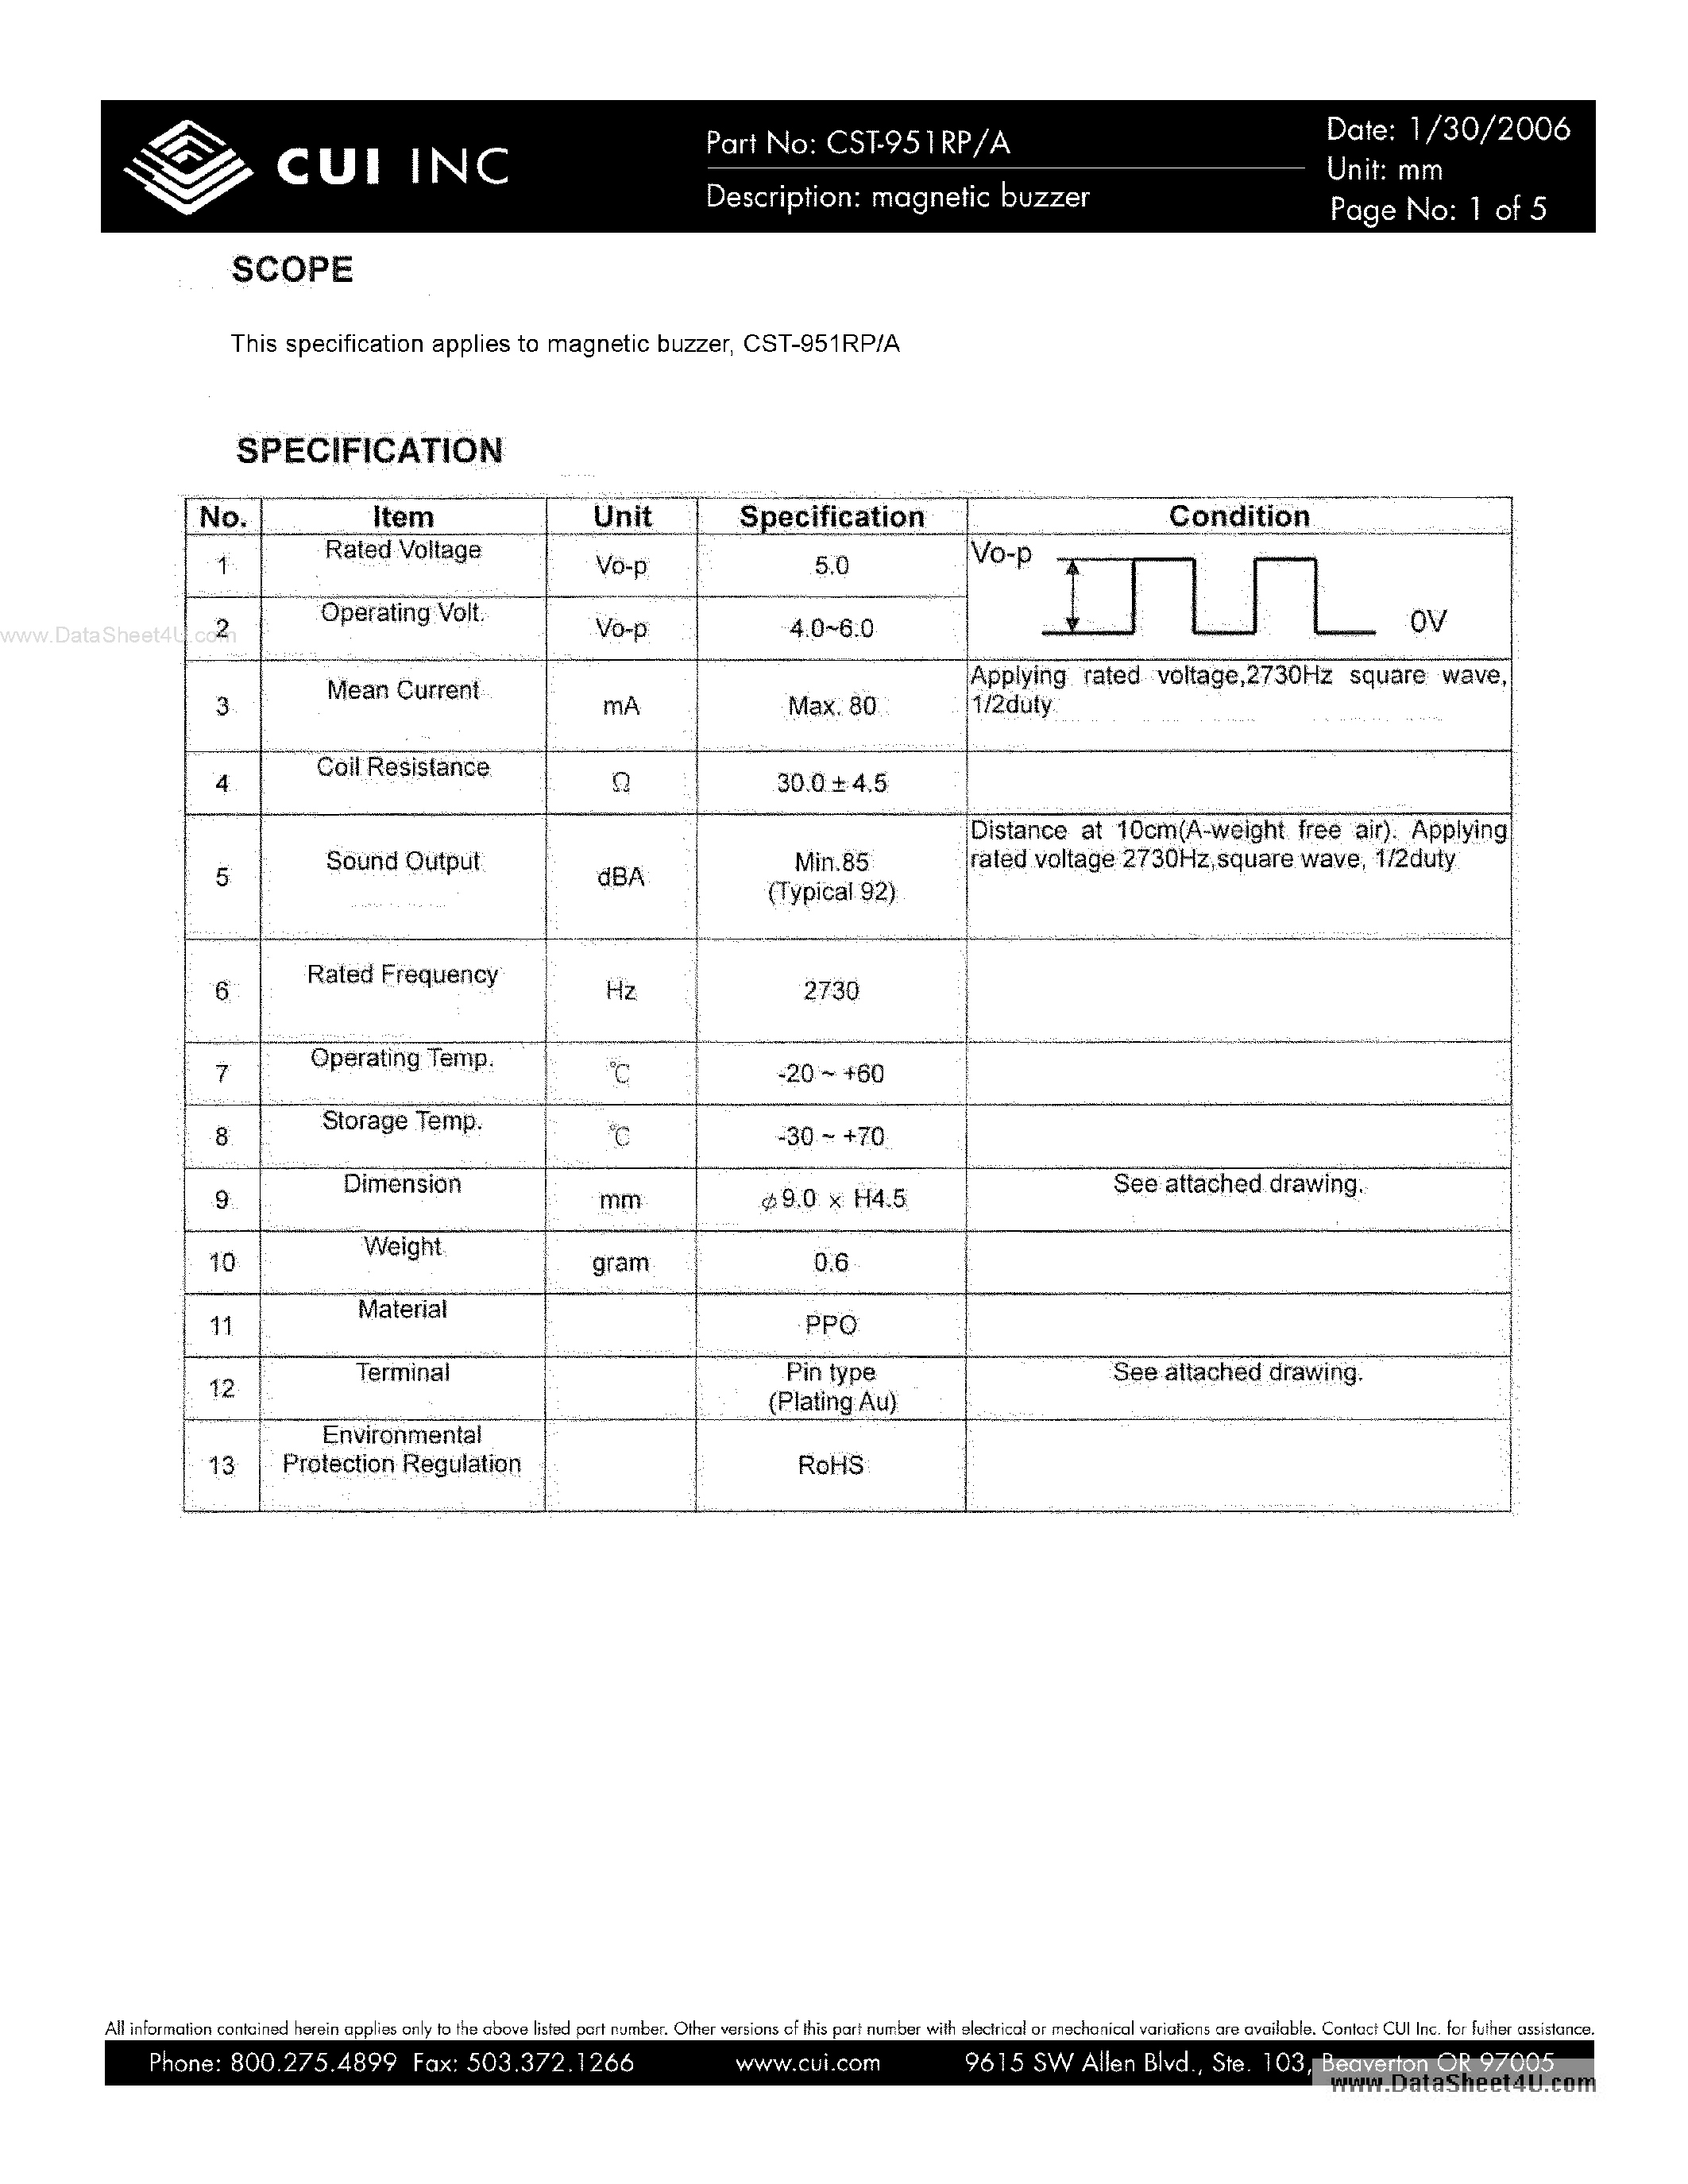 Datasheet CST-951RP - magnetic buzzer page 1